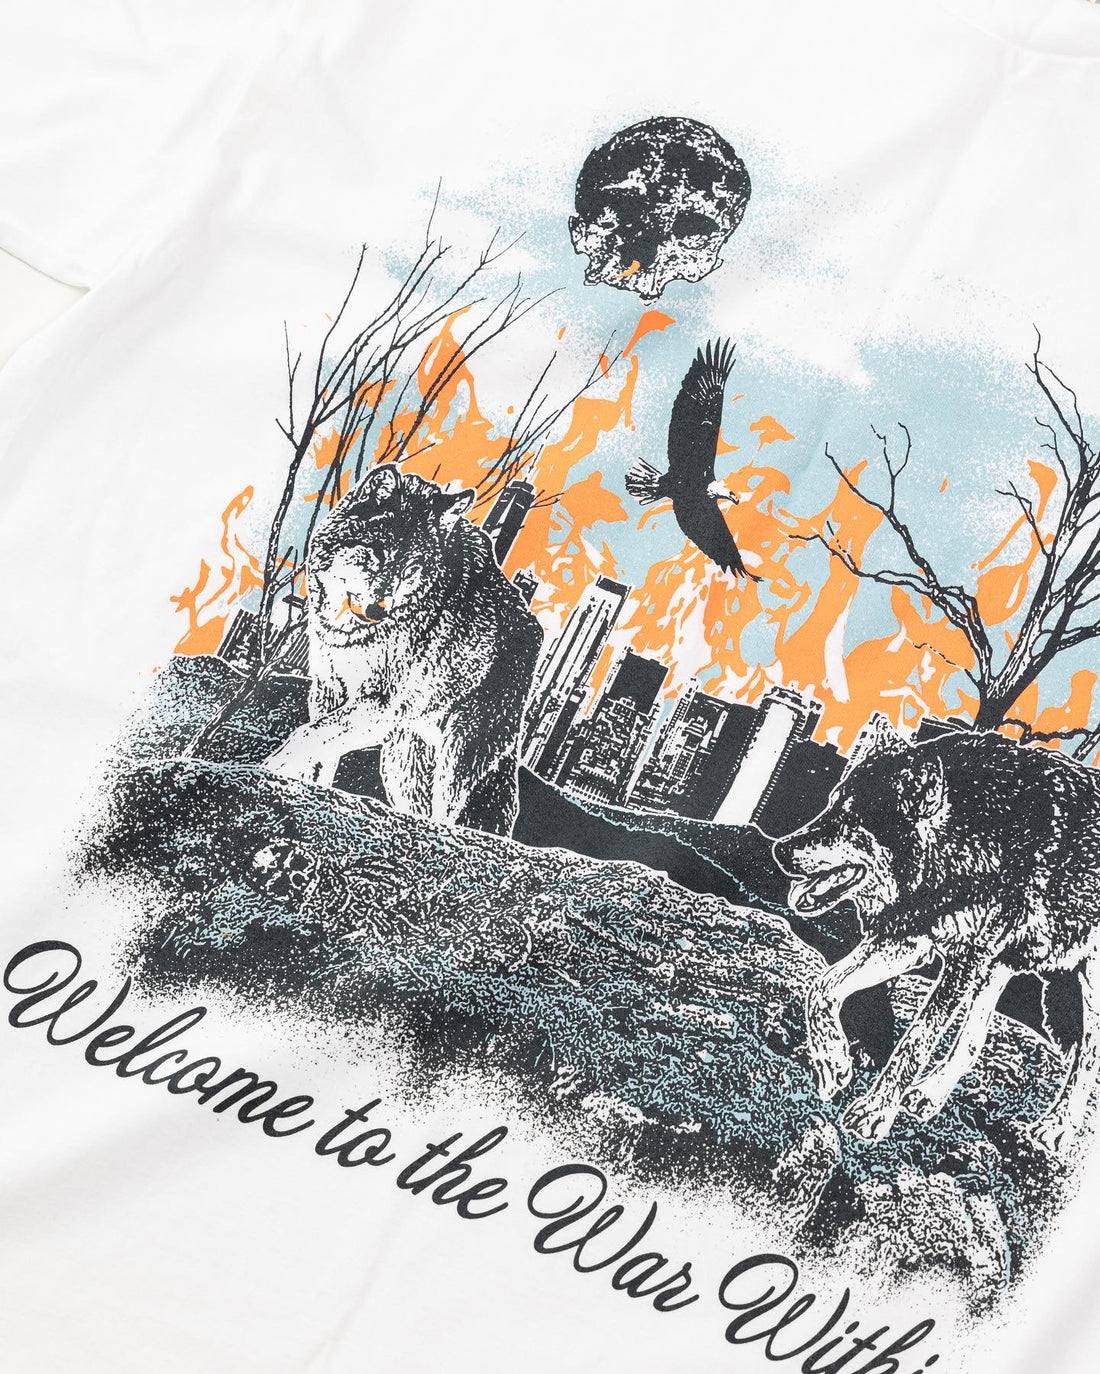 The War Within Tee (WHITE)